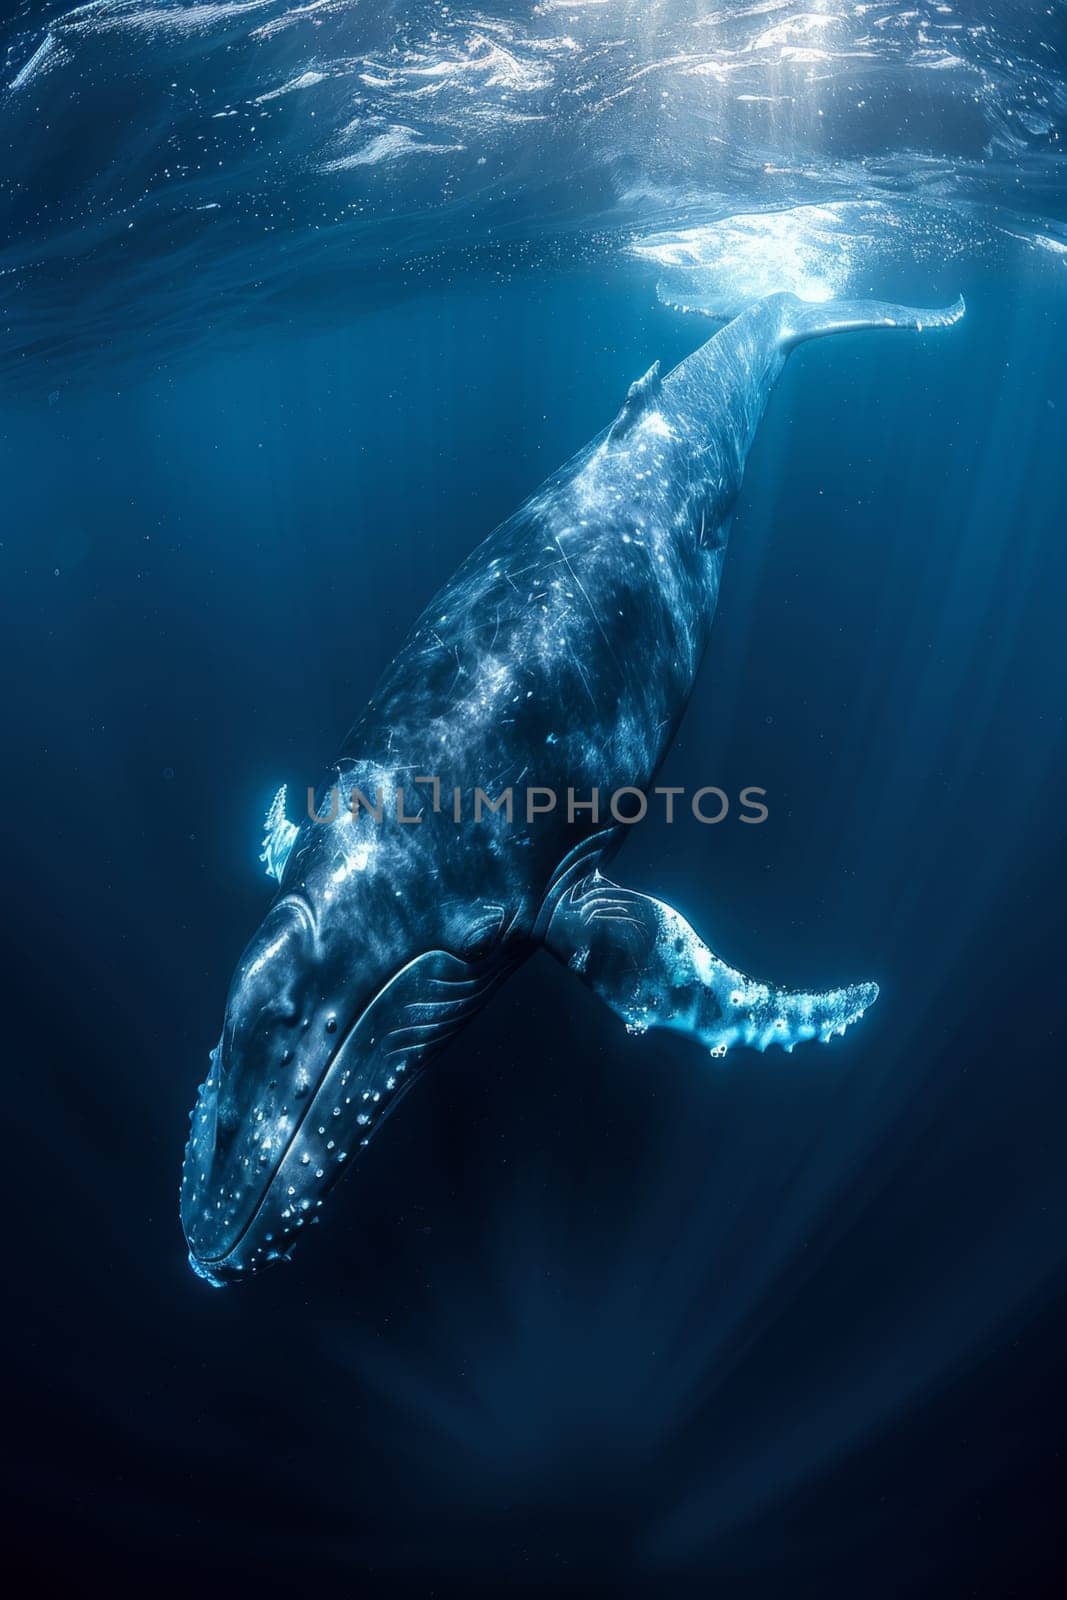 World Oceans Day. A floating whale underwater.